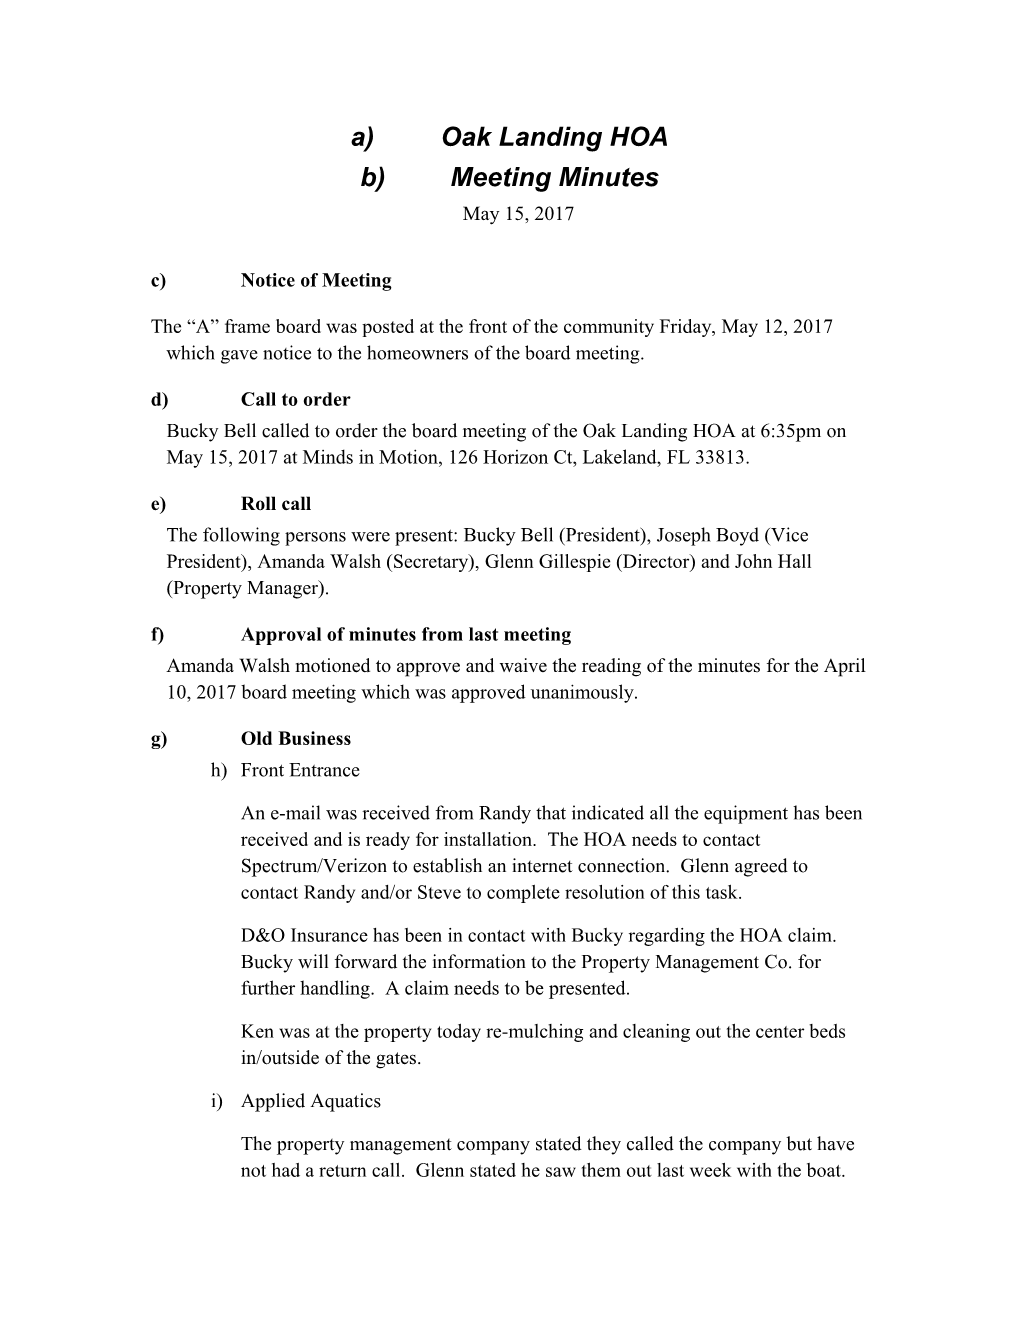 Formal Meeting Minutes s6